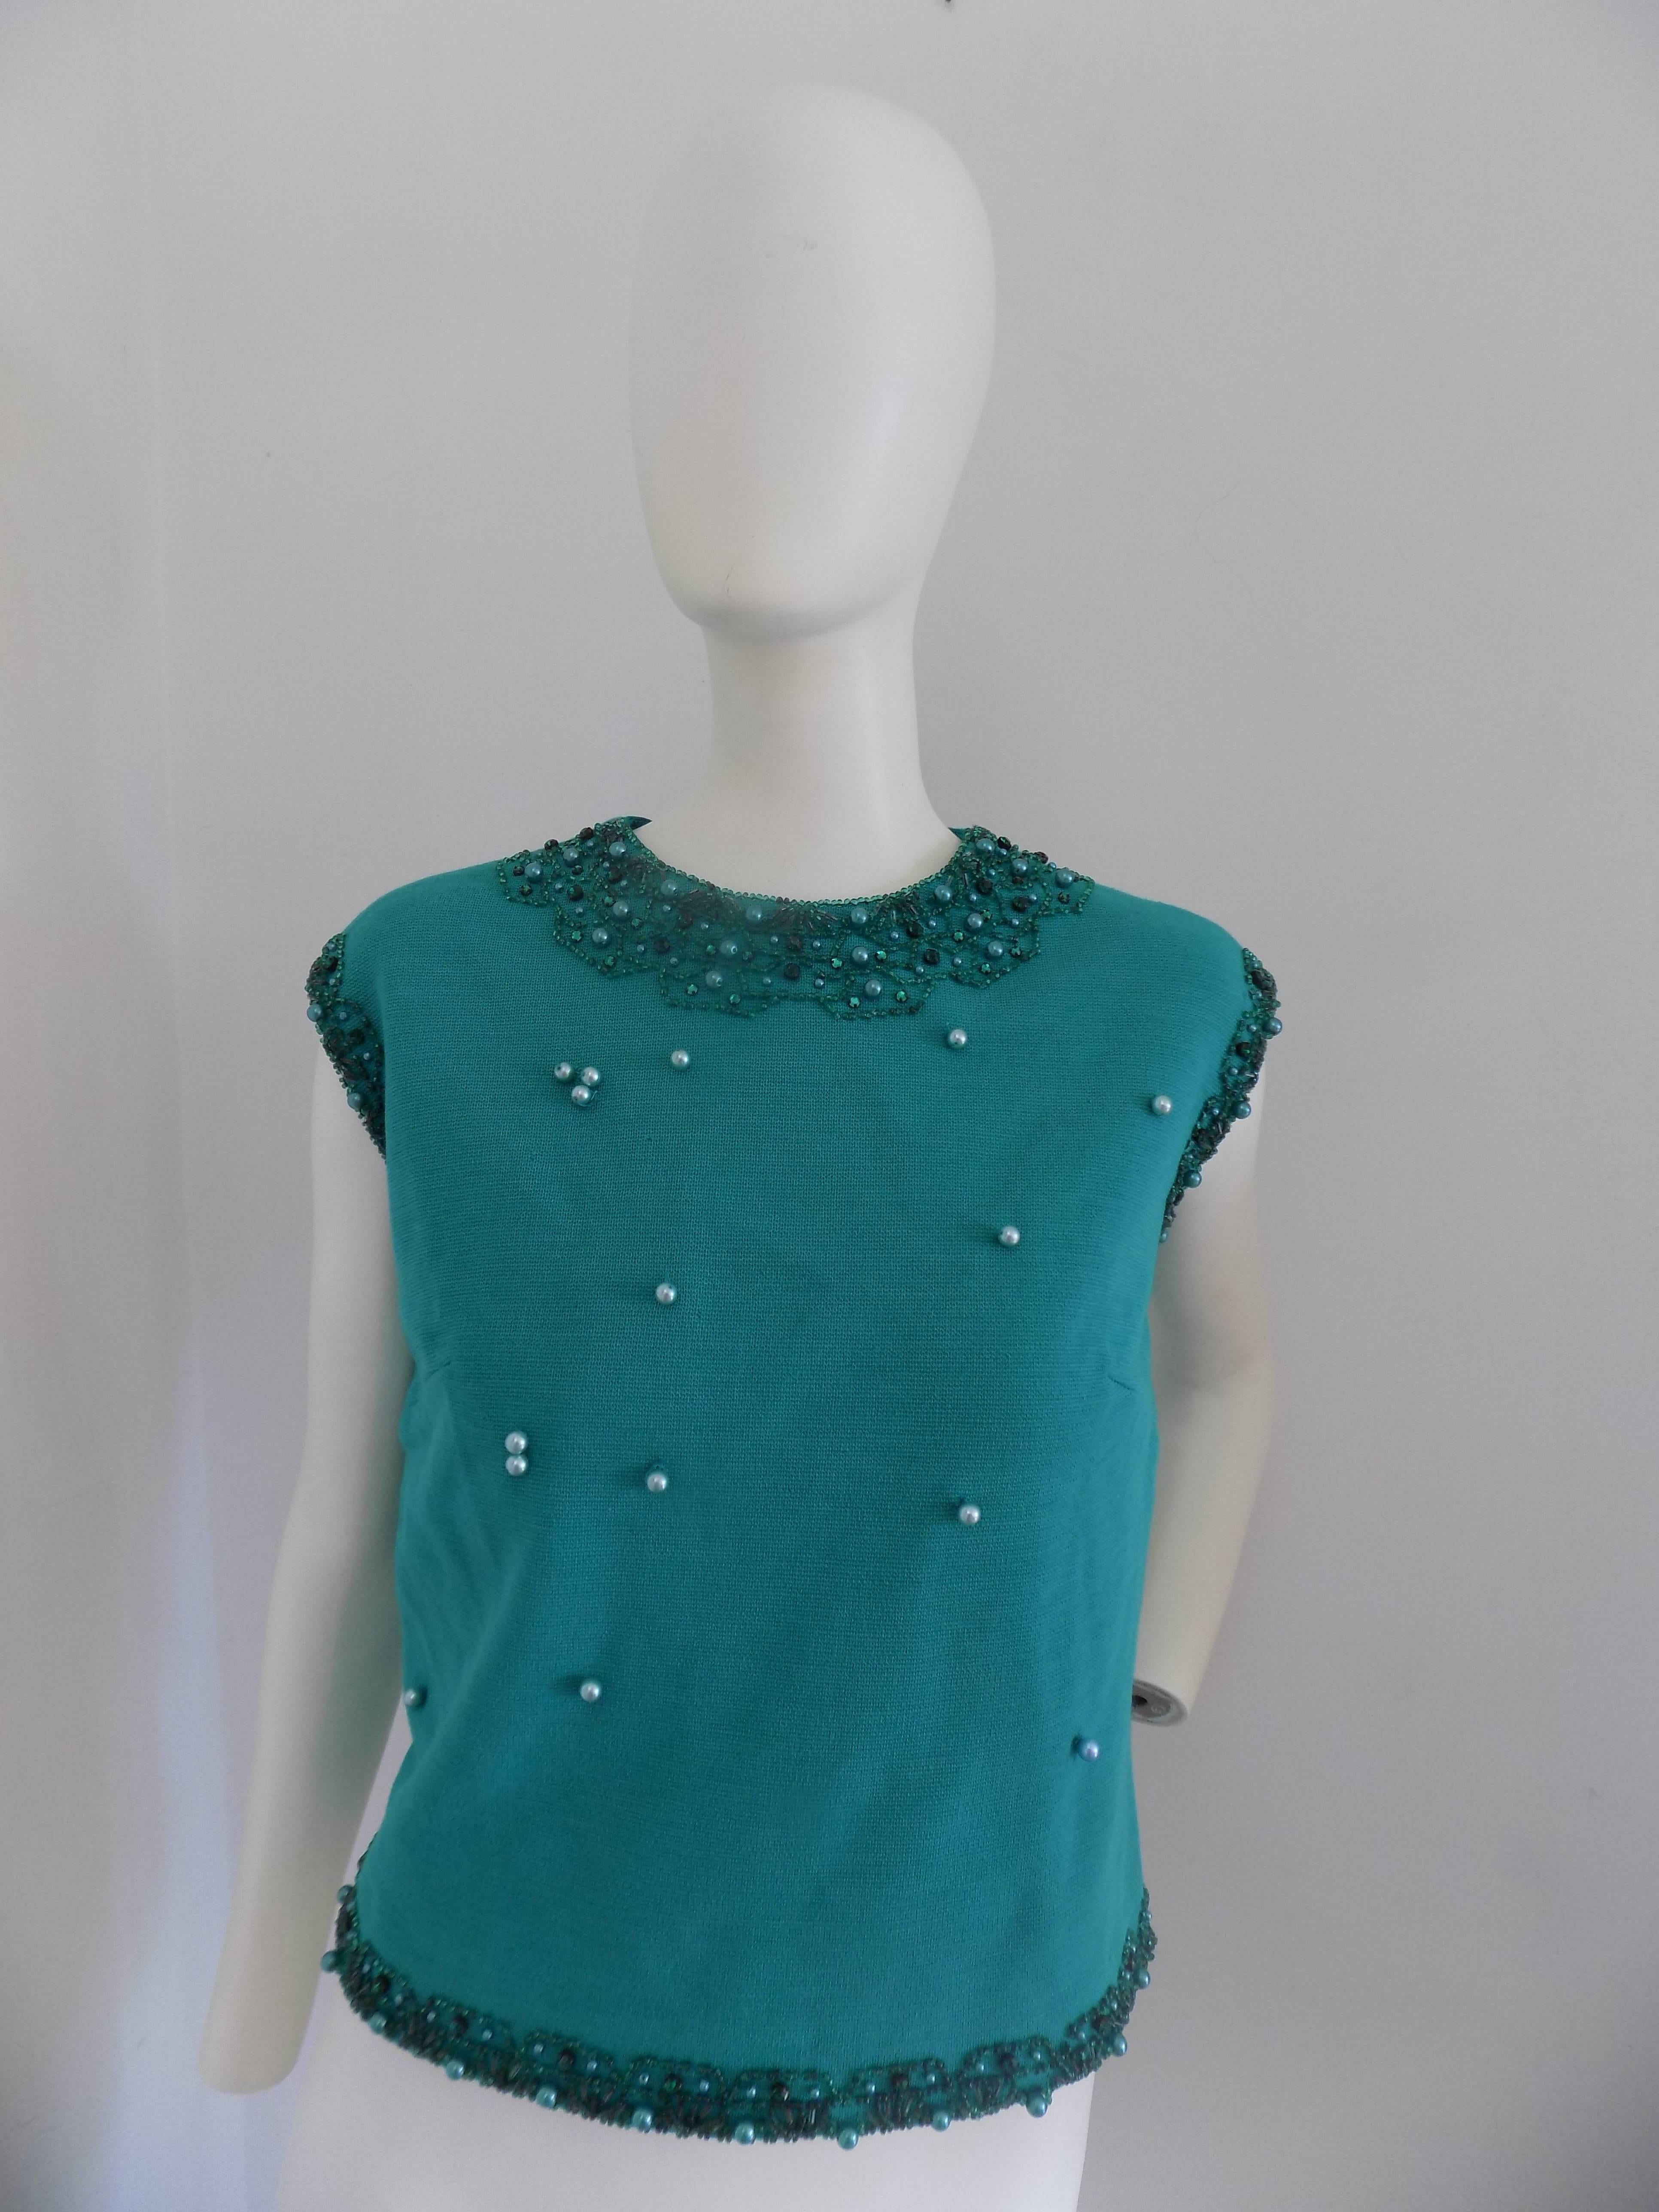 1990s Fashionbar Green Shirt 
Made in the british crown colony of hong kong in size 12
Composition: Wool